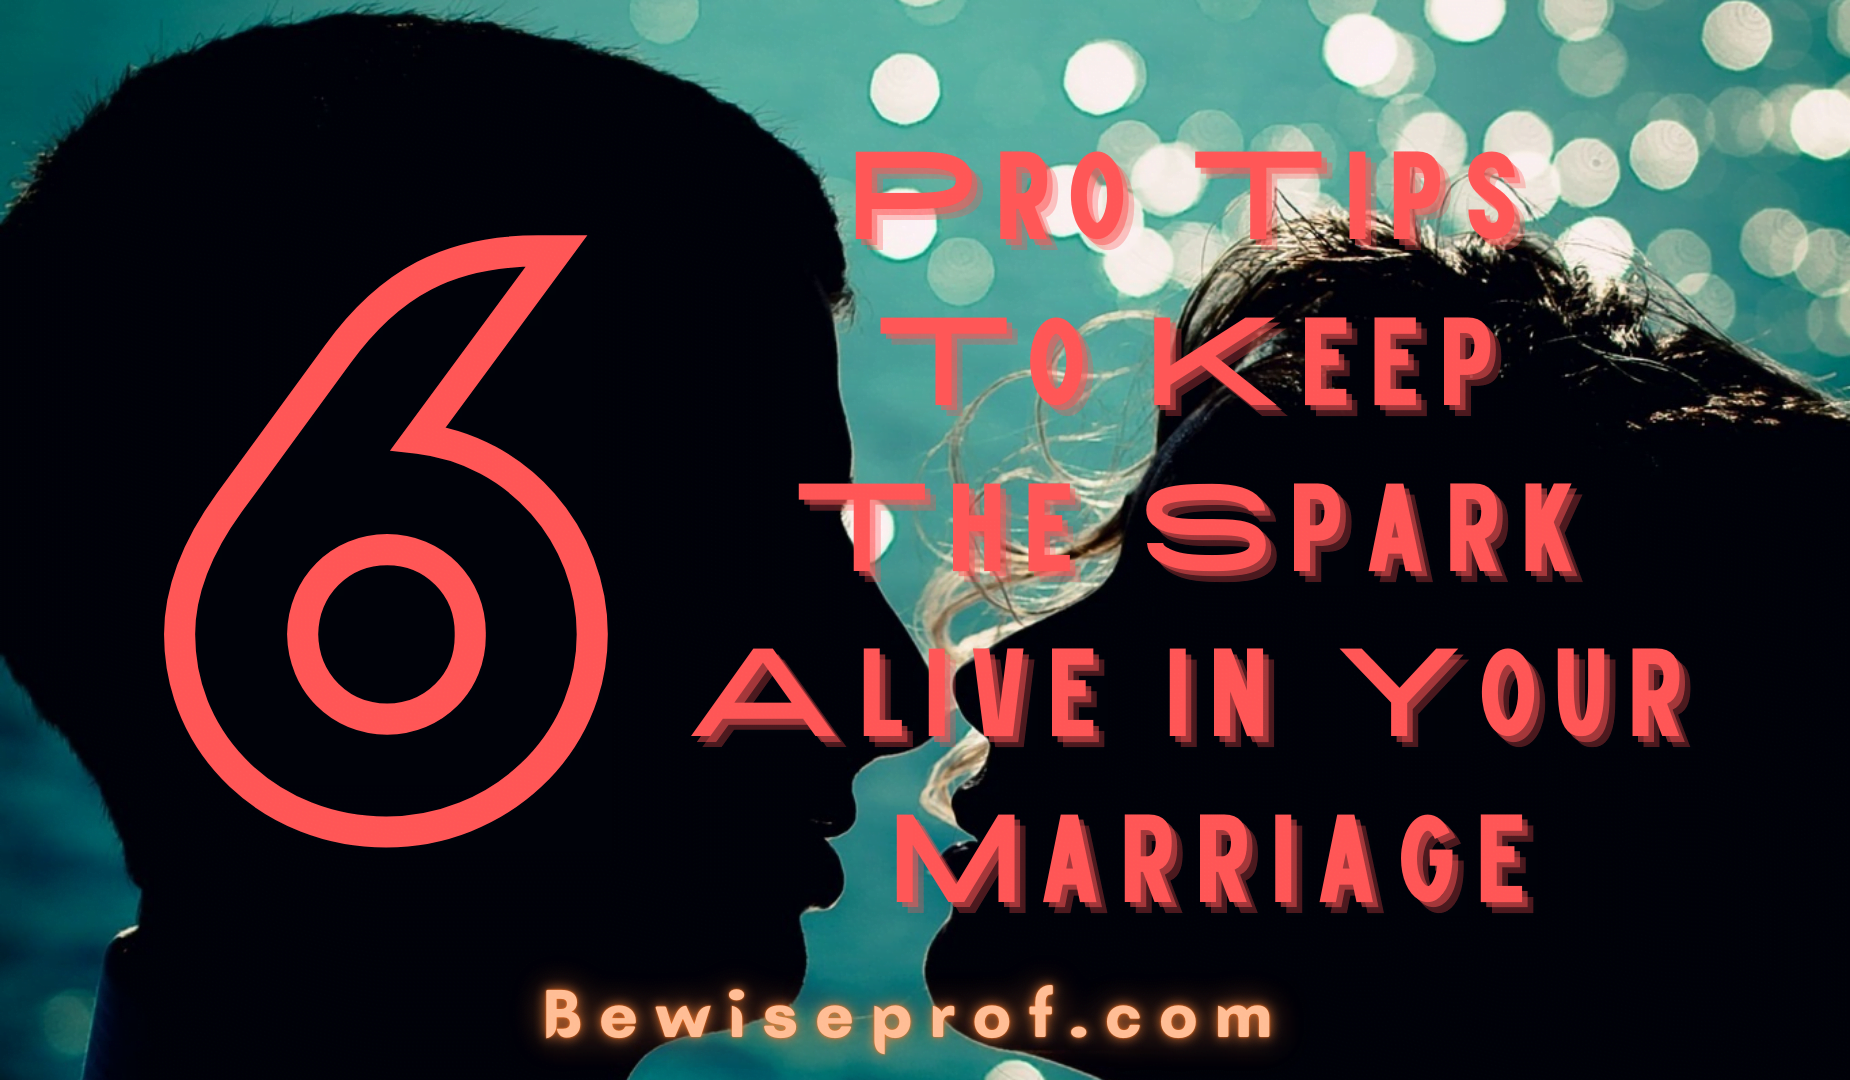 6 Pro Tips To Keep The Spark Alive In Your Marriage